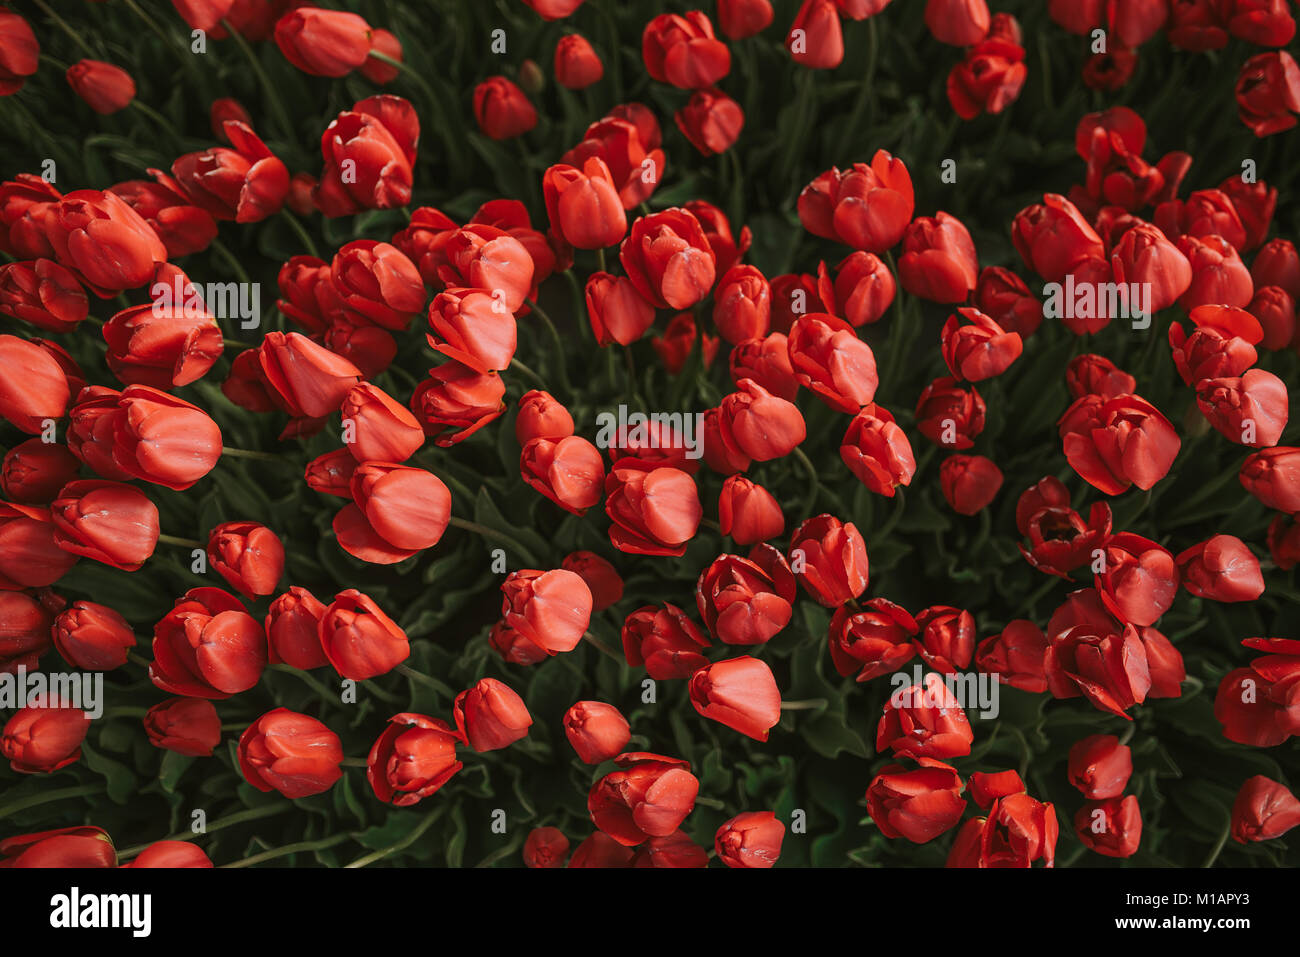 Flower Background. Fresh red tulips Garden. Field with red tulips in the Turkey. Stock Photo